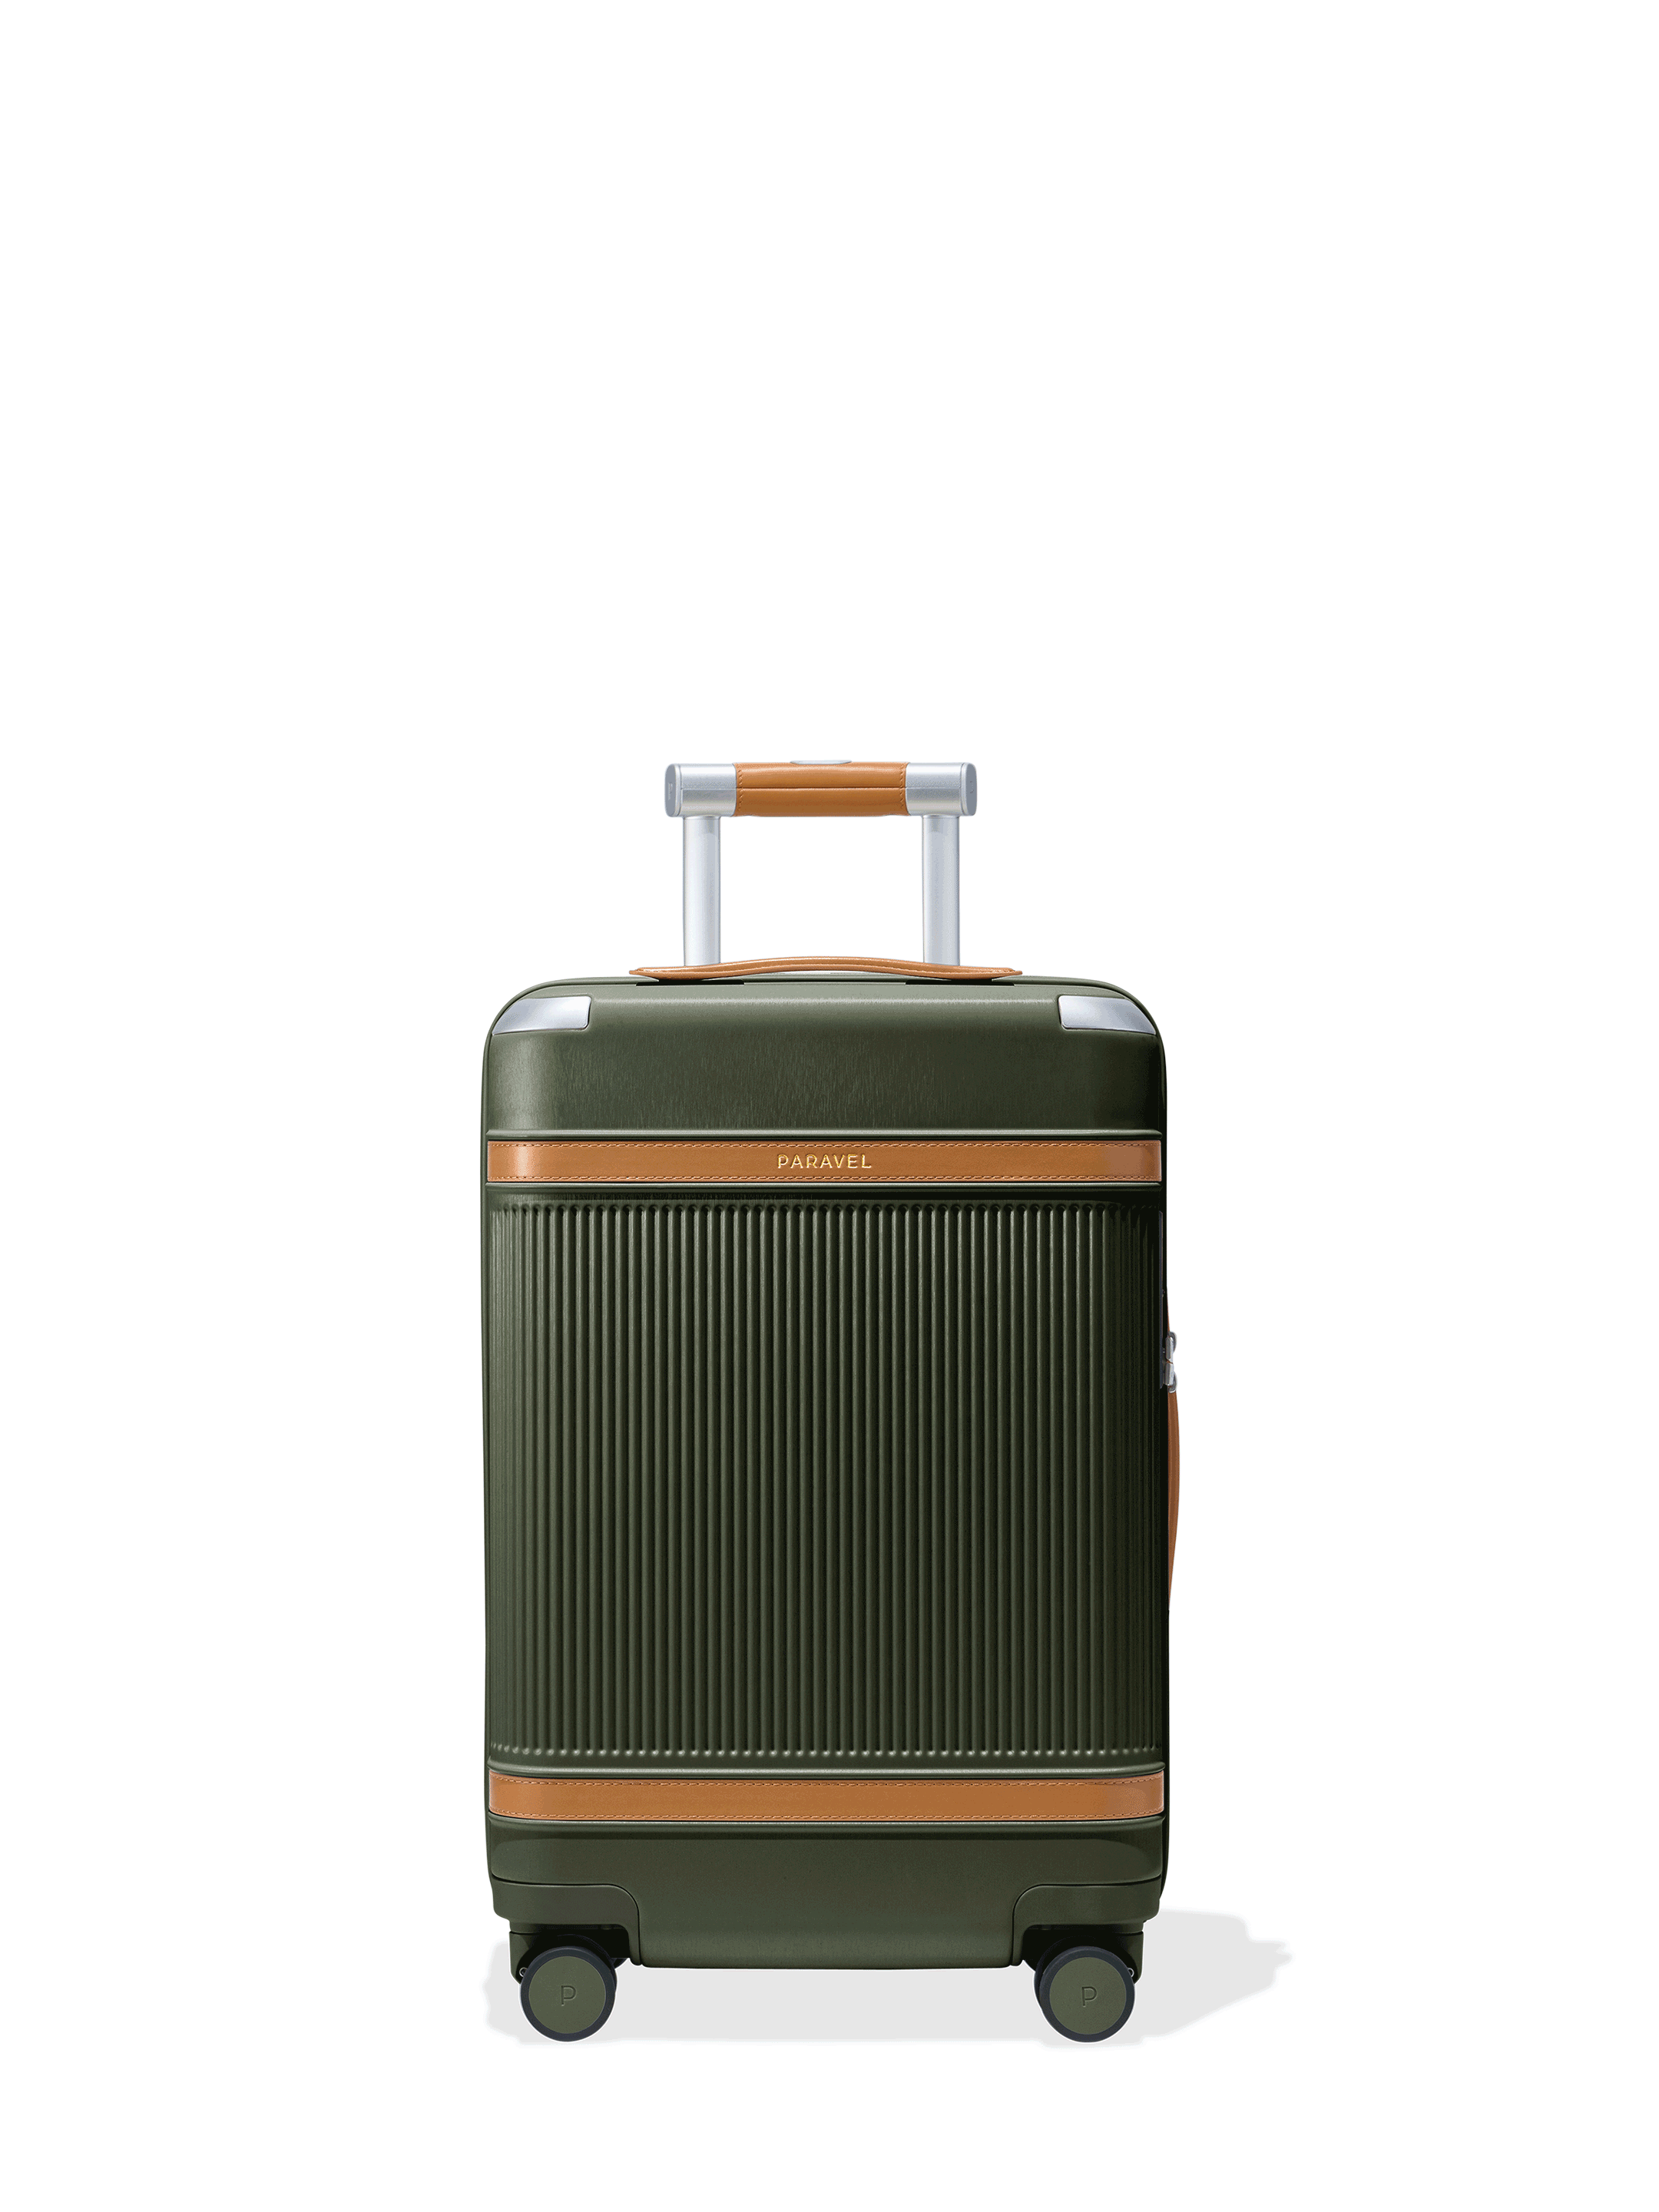 Safari - Carry-On Suitcase - 4 Wheels, Brown/Natural